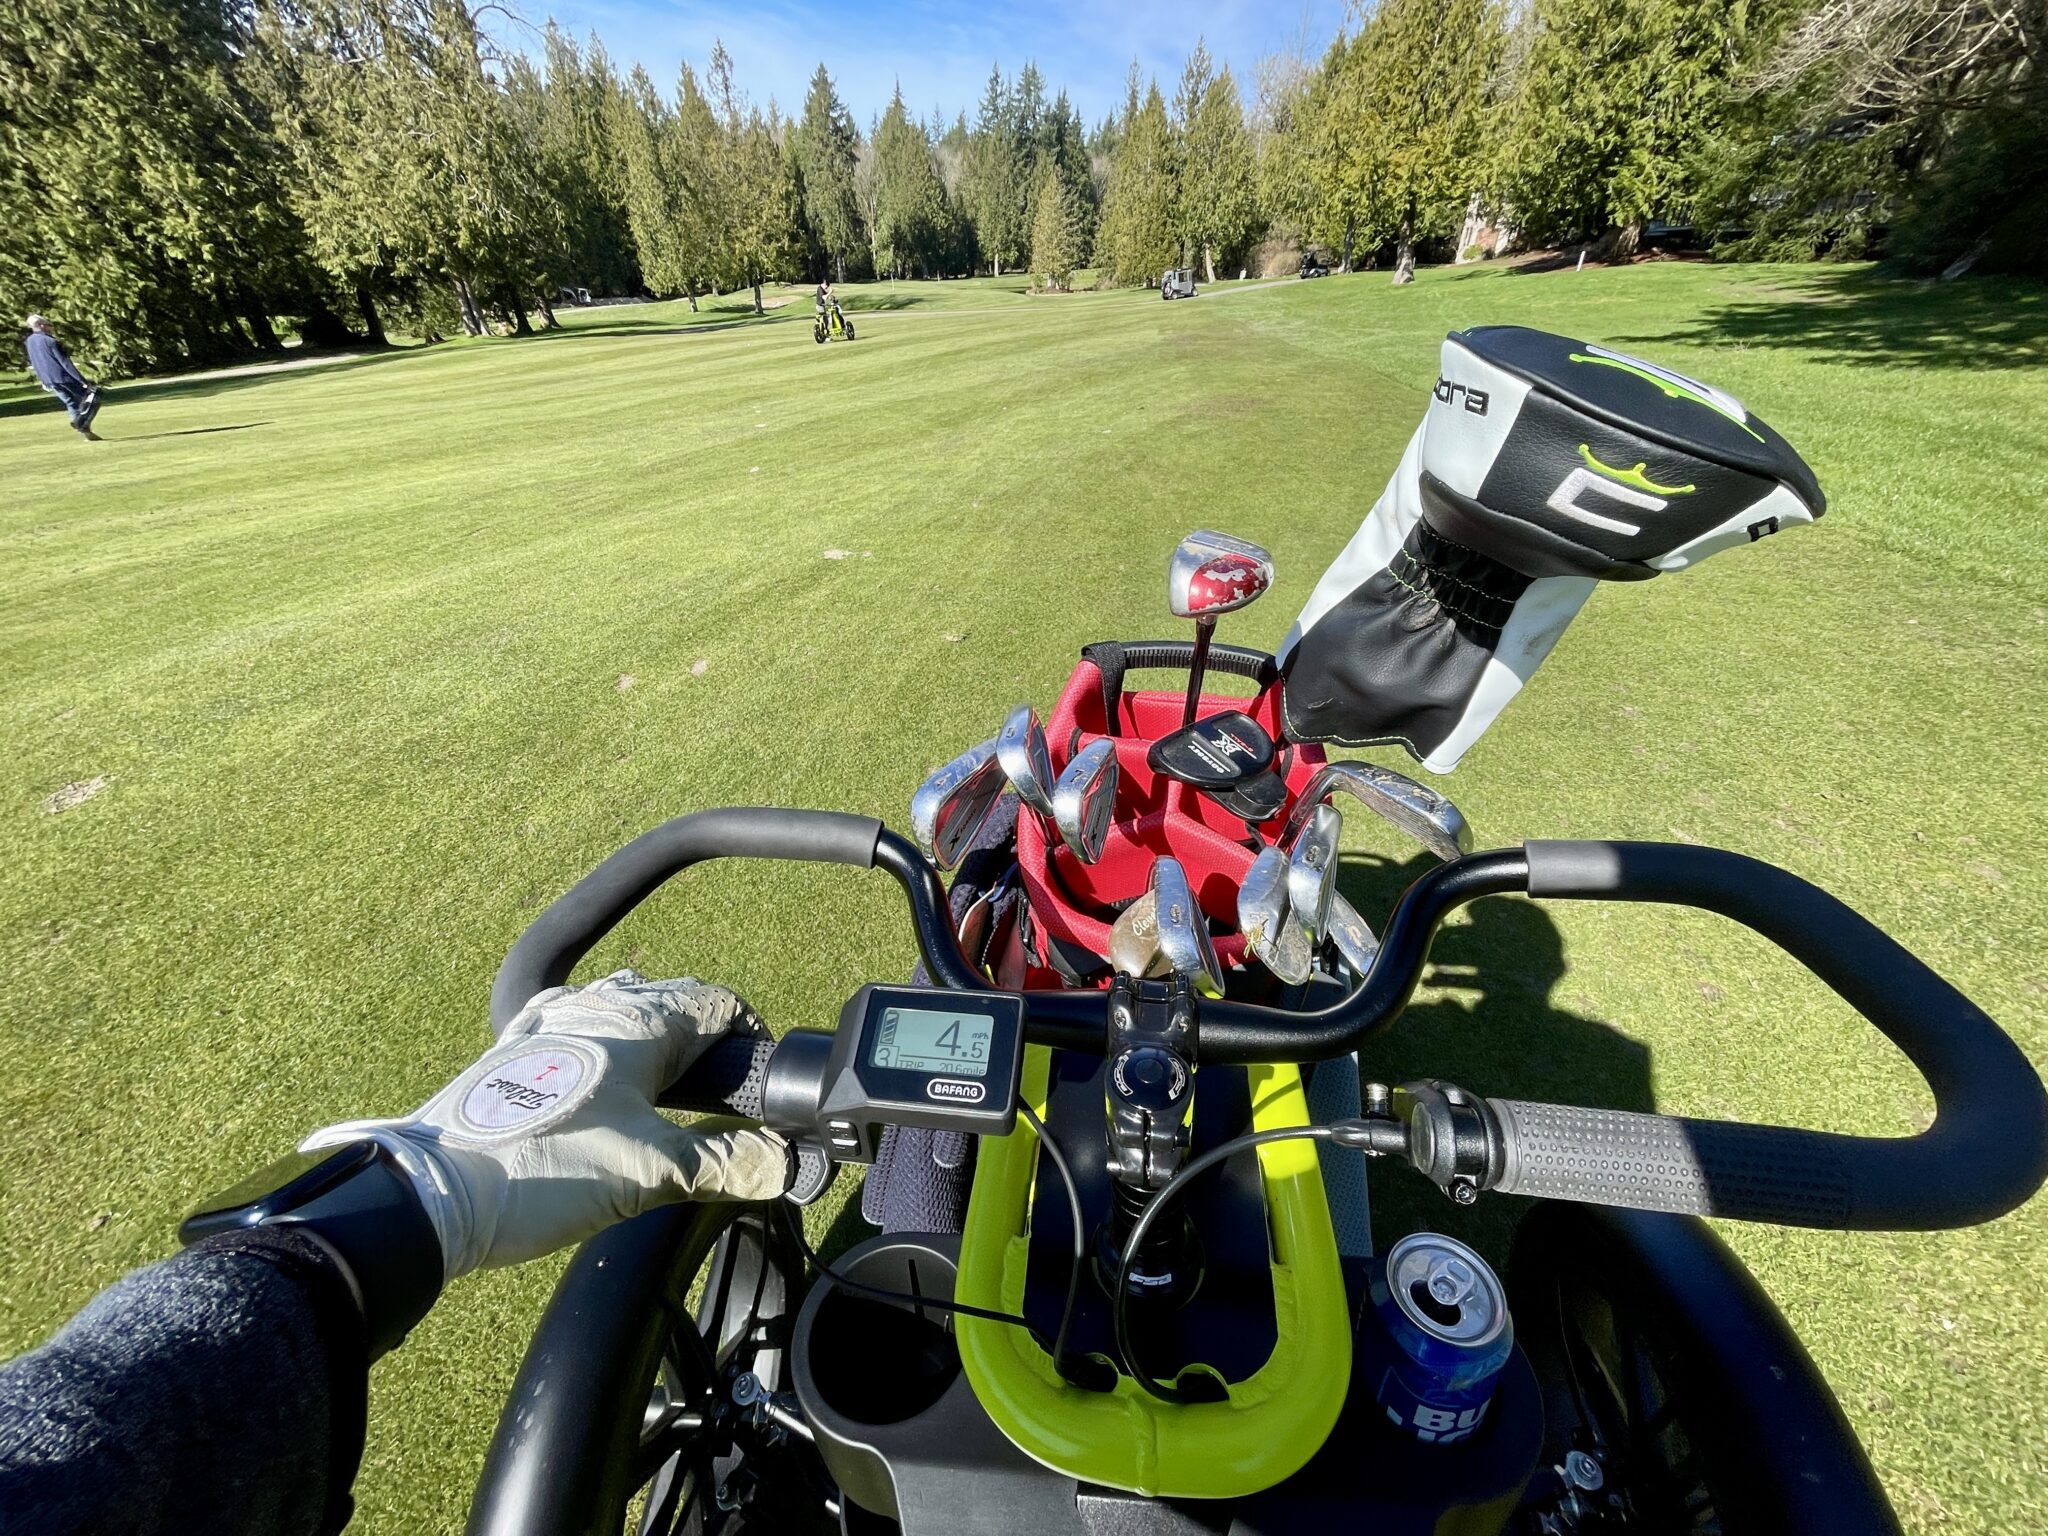 microsoft, riding bikes and making birdies: we played golf with an electric 3-wheeler built by a seattle startup